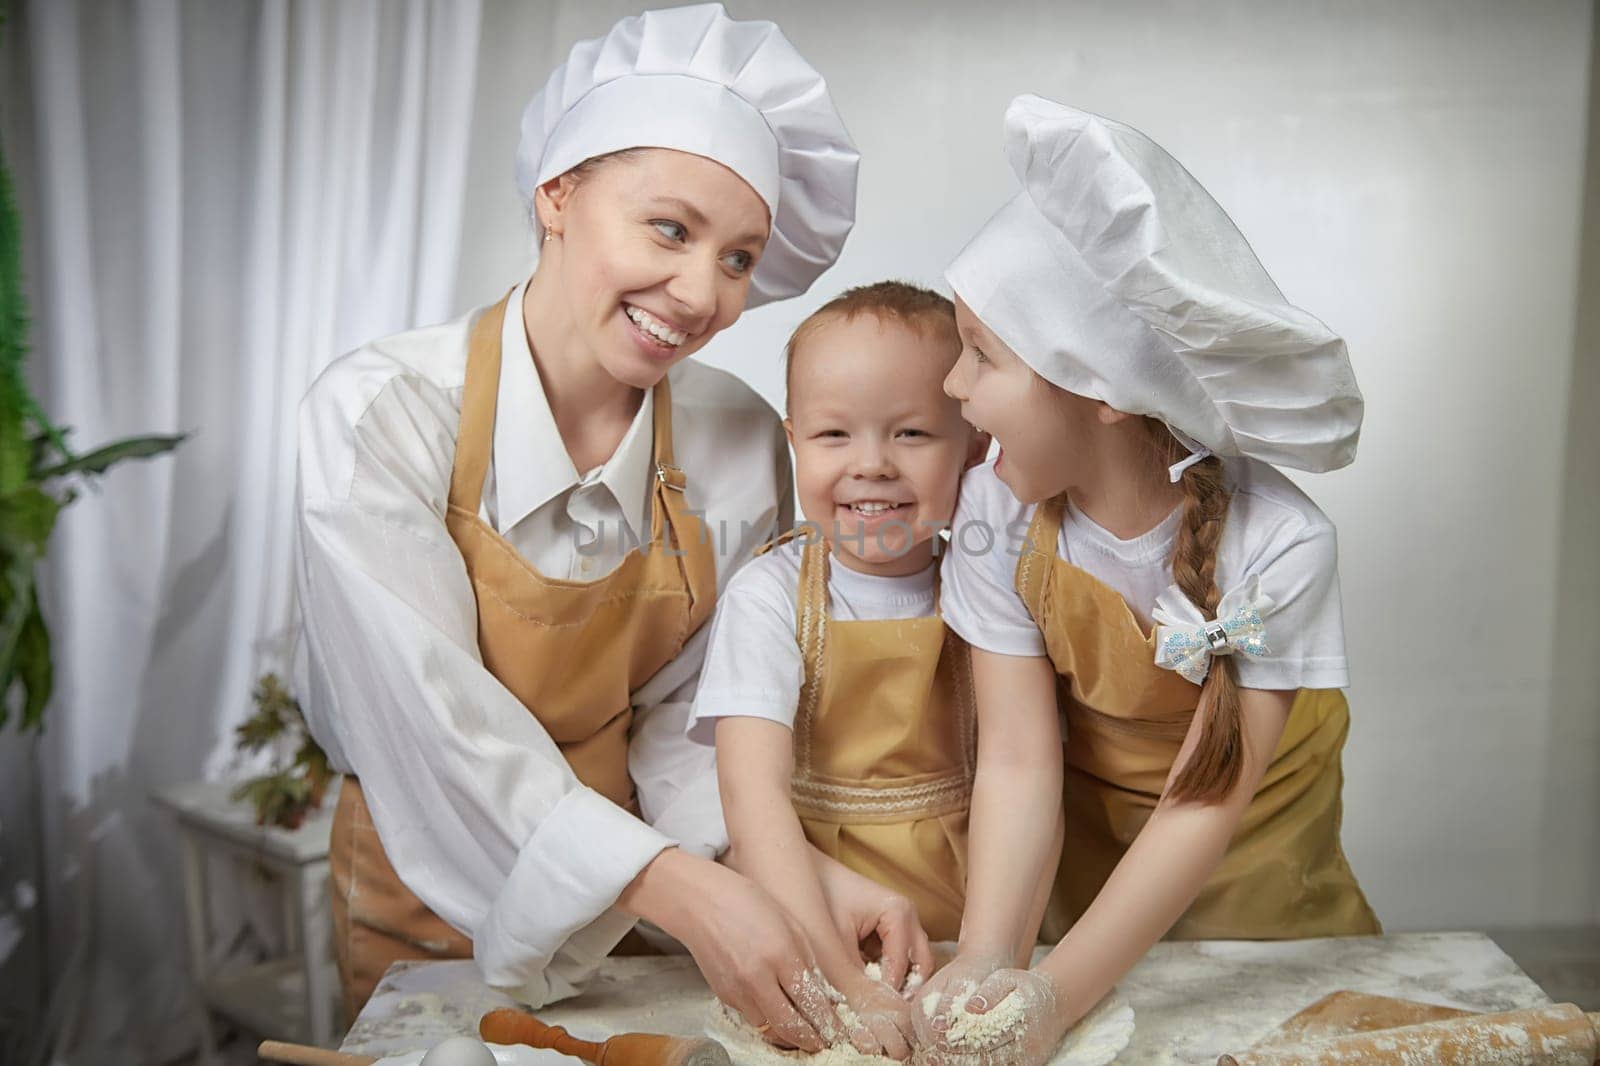 Cute oriental family with mother, daughter, son cooking in kitchen on Ramadan, Kurban-Bairam, Eid al-Adha. Funny family at a cook photo shoot. Pancakes, Maslenitsa, Easter